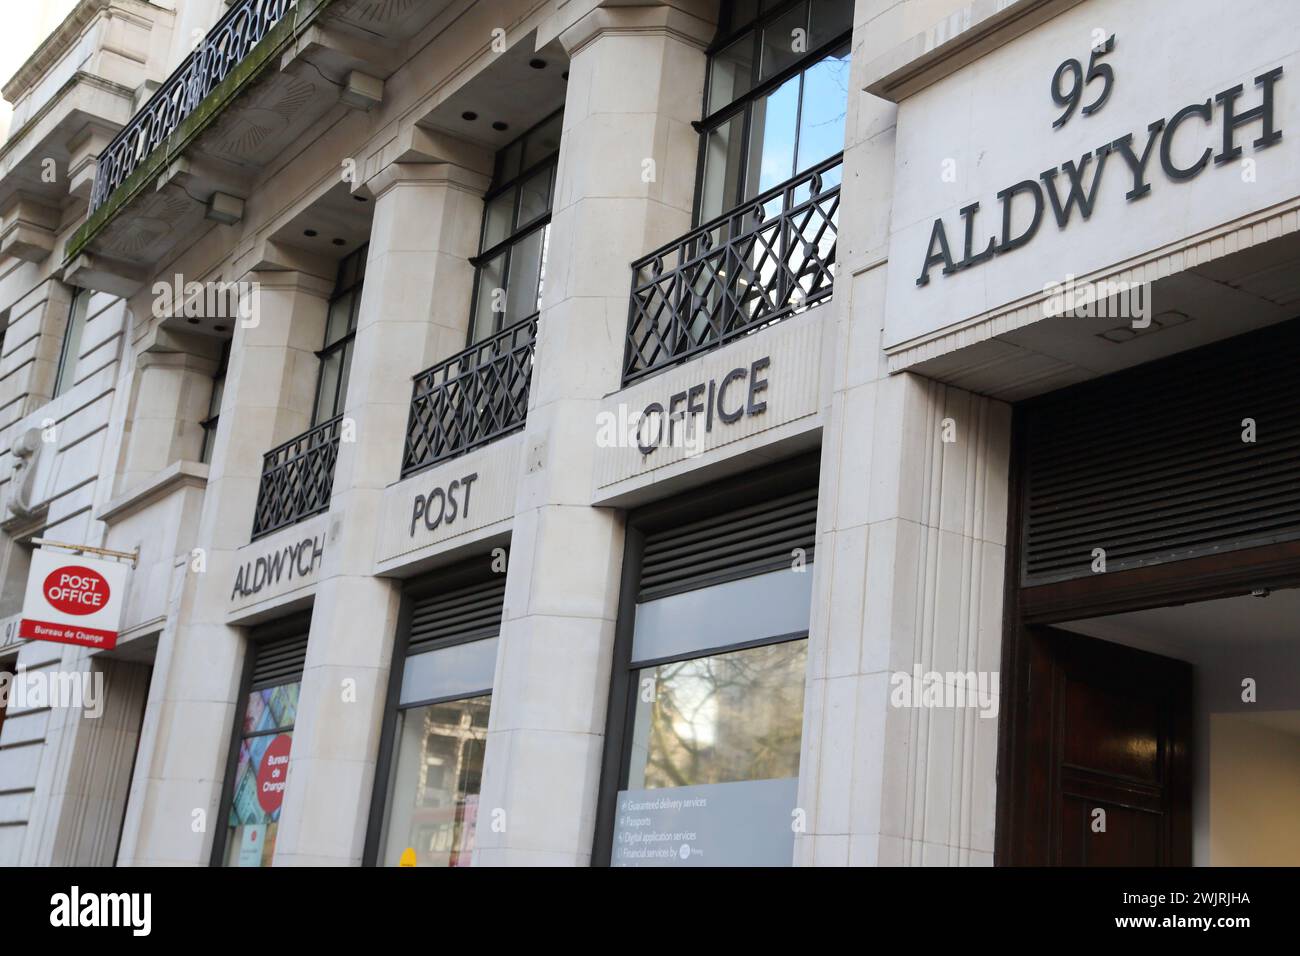 Exterior of the Aldwych Post Office, City of London, UK Stock Photo